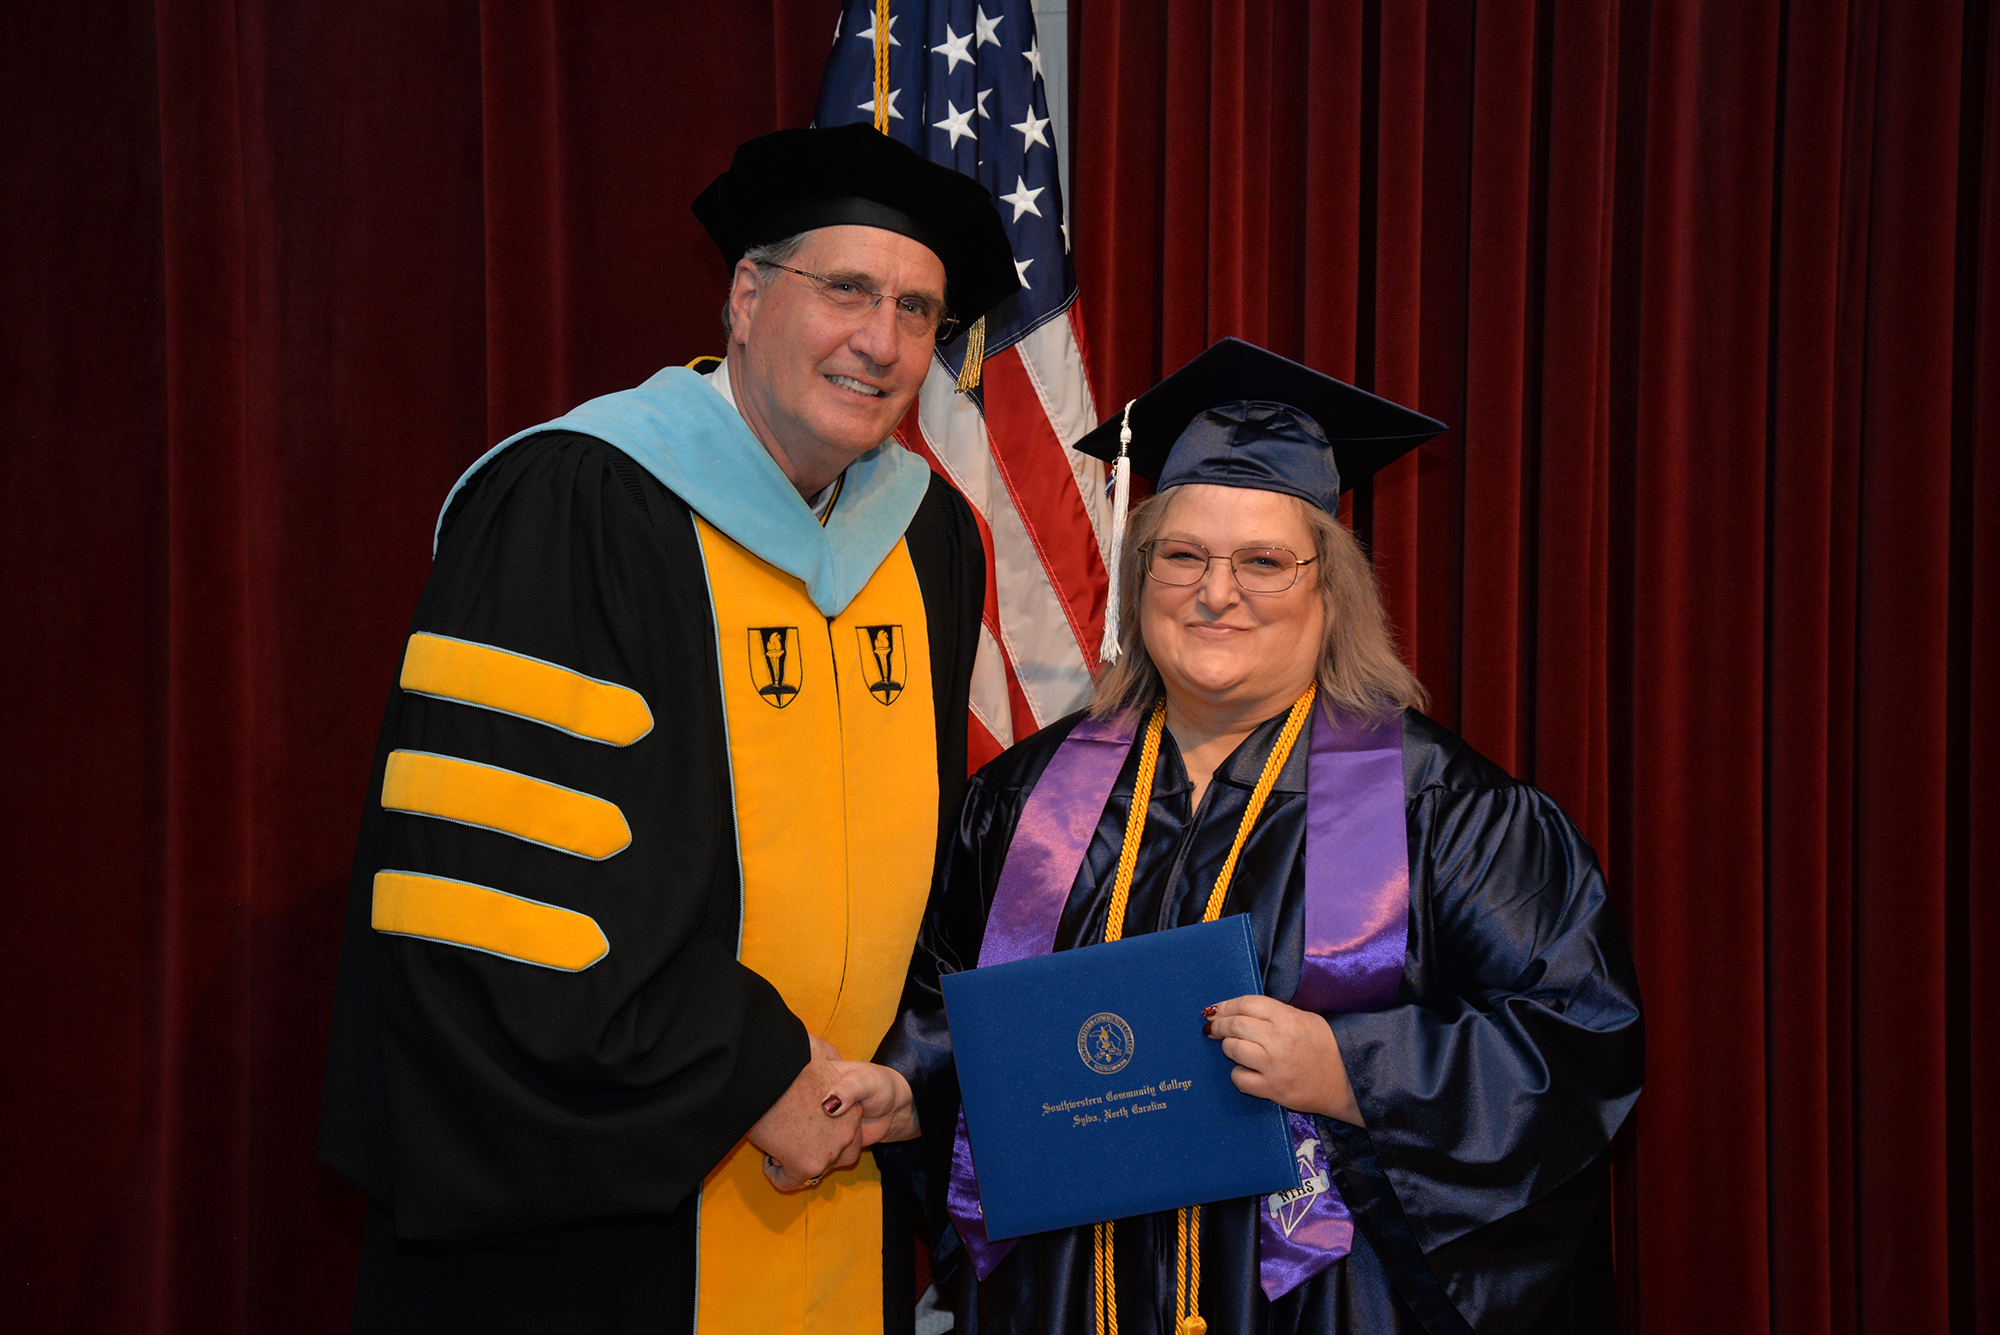 SCC President Dr. Don Tomas presents a diploma cover to a graduate in December of 2019, the last time Southwestern held a traditional indoor graduation ceremony